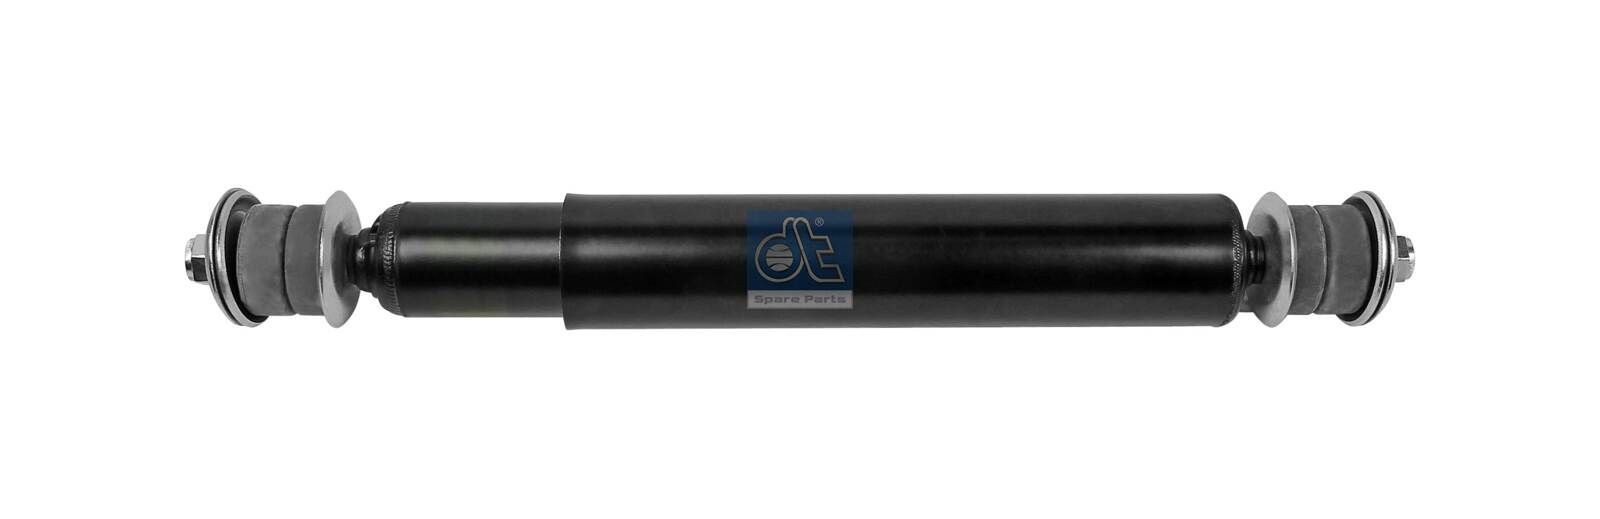 DT Spare Parts 5.13011 Shock absorber Oil Pressure, Telescopic Shock Absorber, Top pin, Bottom Pin